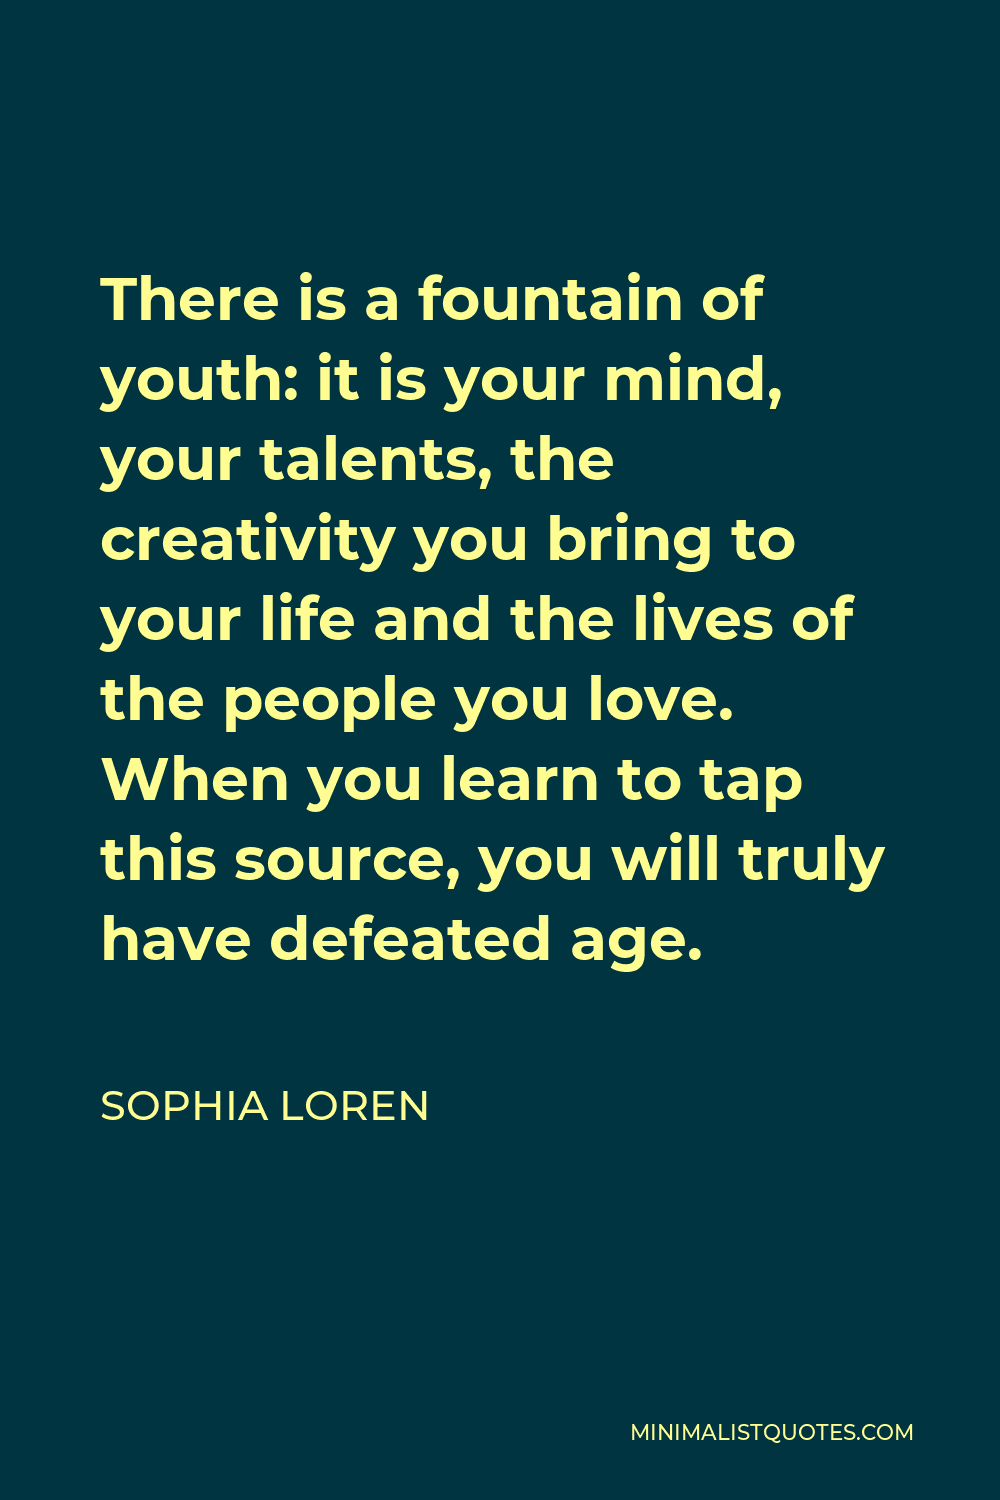 Sophia Loren Quote - There is a fountain of youth: it is your mind, your talents, the creativity you bring to your life and the lives of the people you love. When you learn to tap this source, you will truly have defeated age.